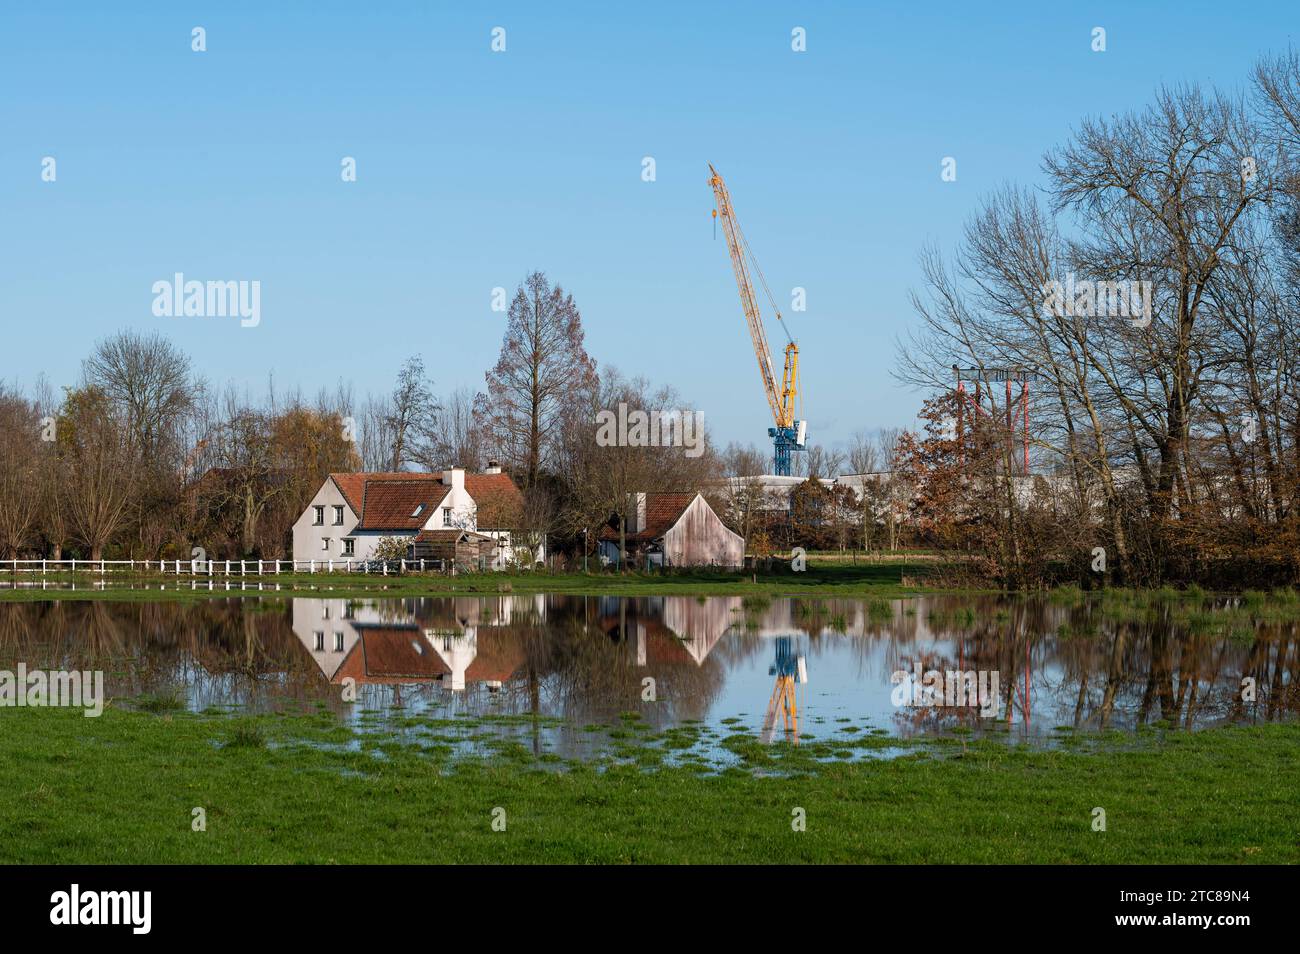 Imde, Meise, Flemish Brabant Region, Belgium, November 28, 2023 - Construction crane and houses reflecting in a flooded meadow Credit: Imago/Alamy Live News Stock Photo